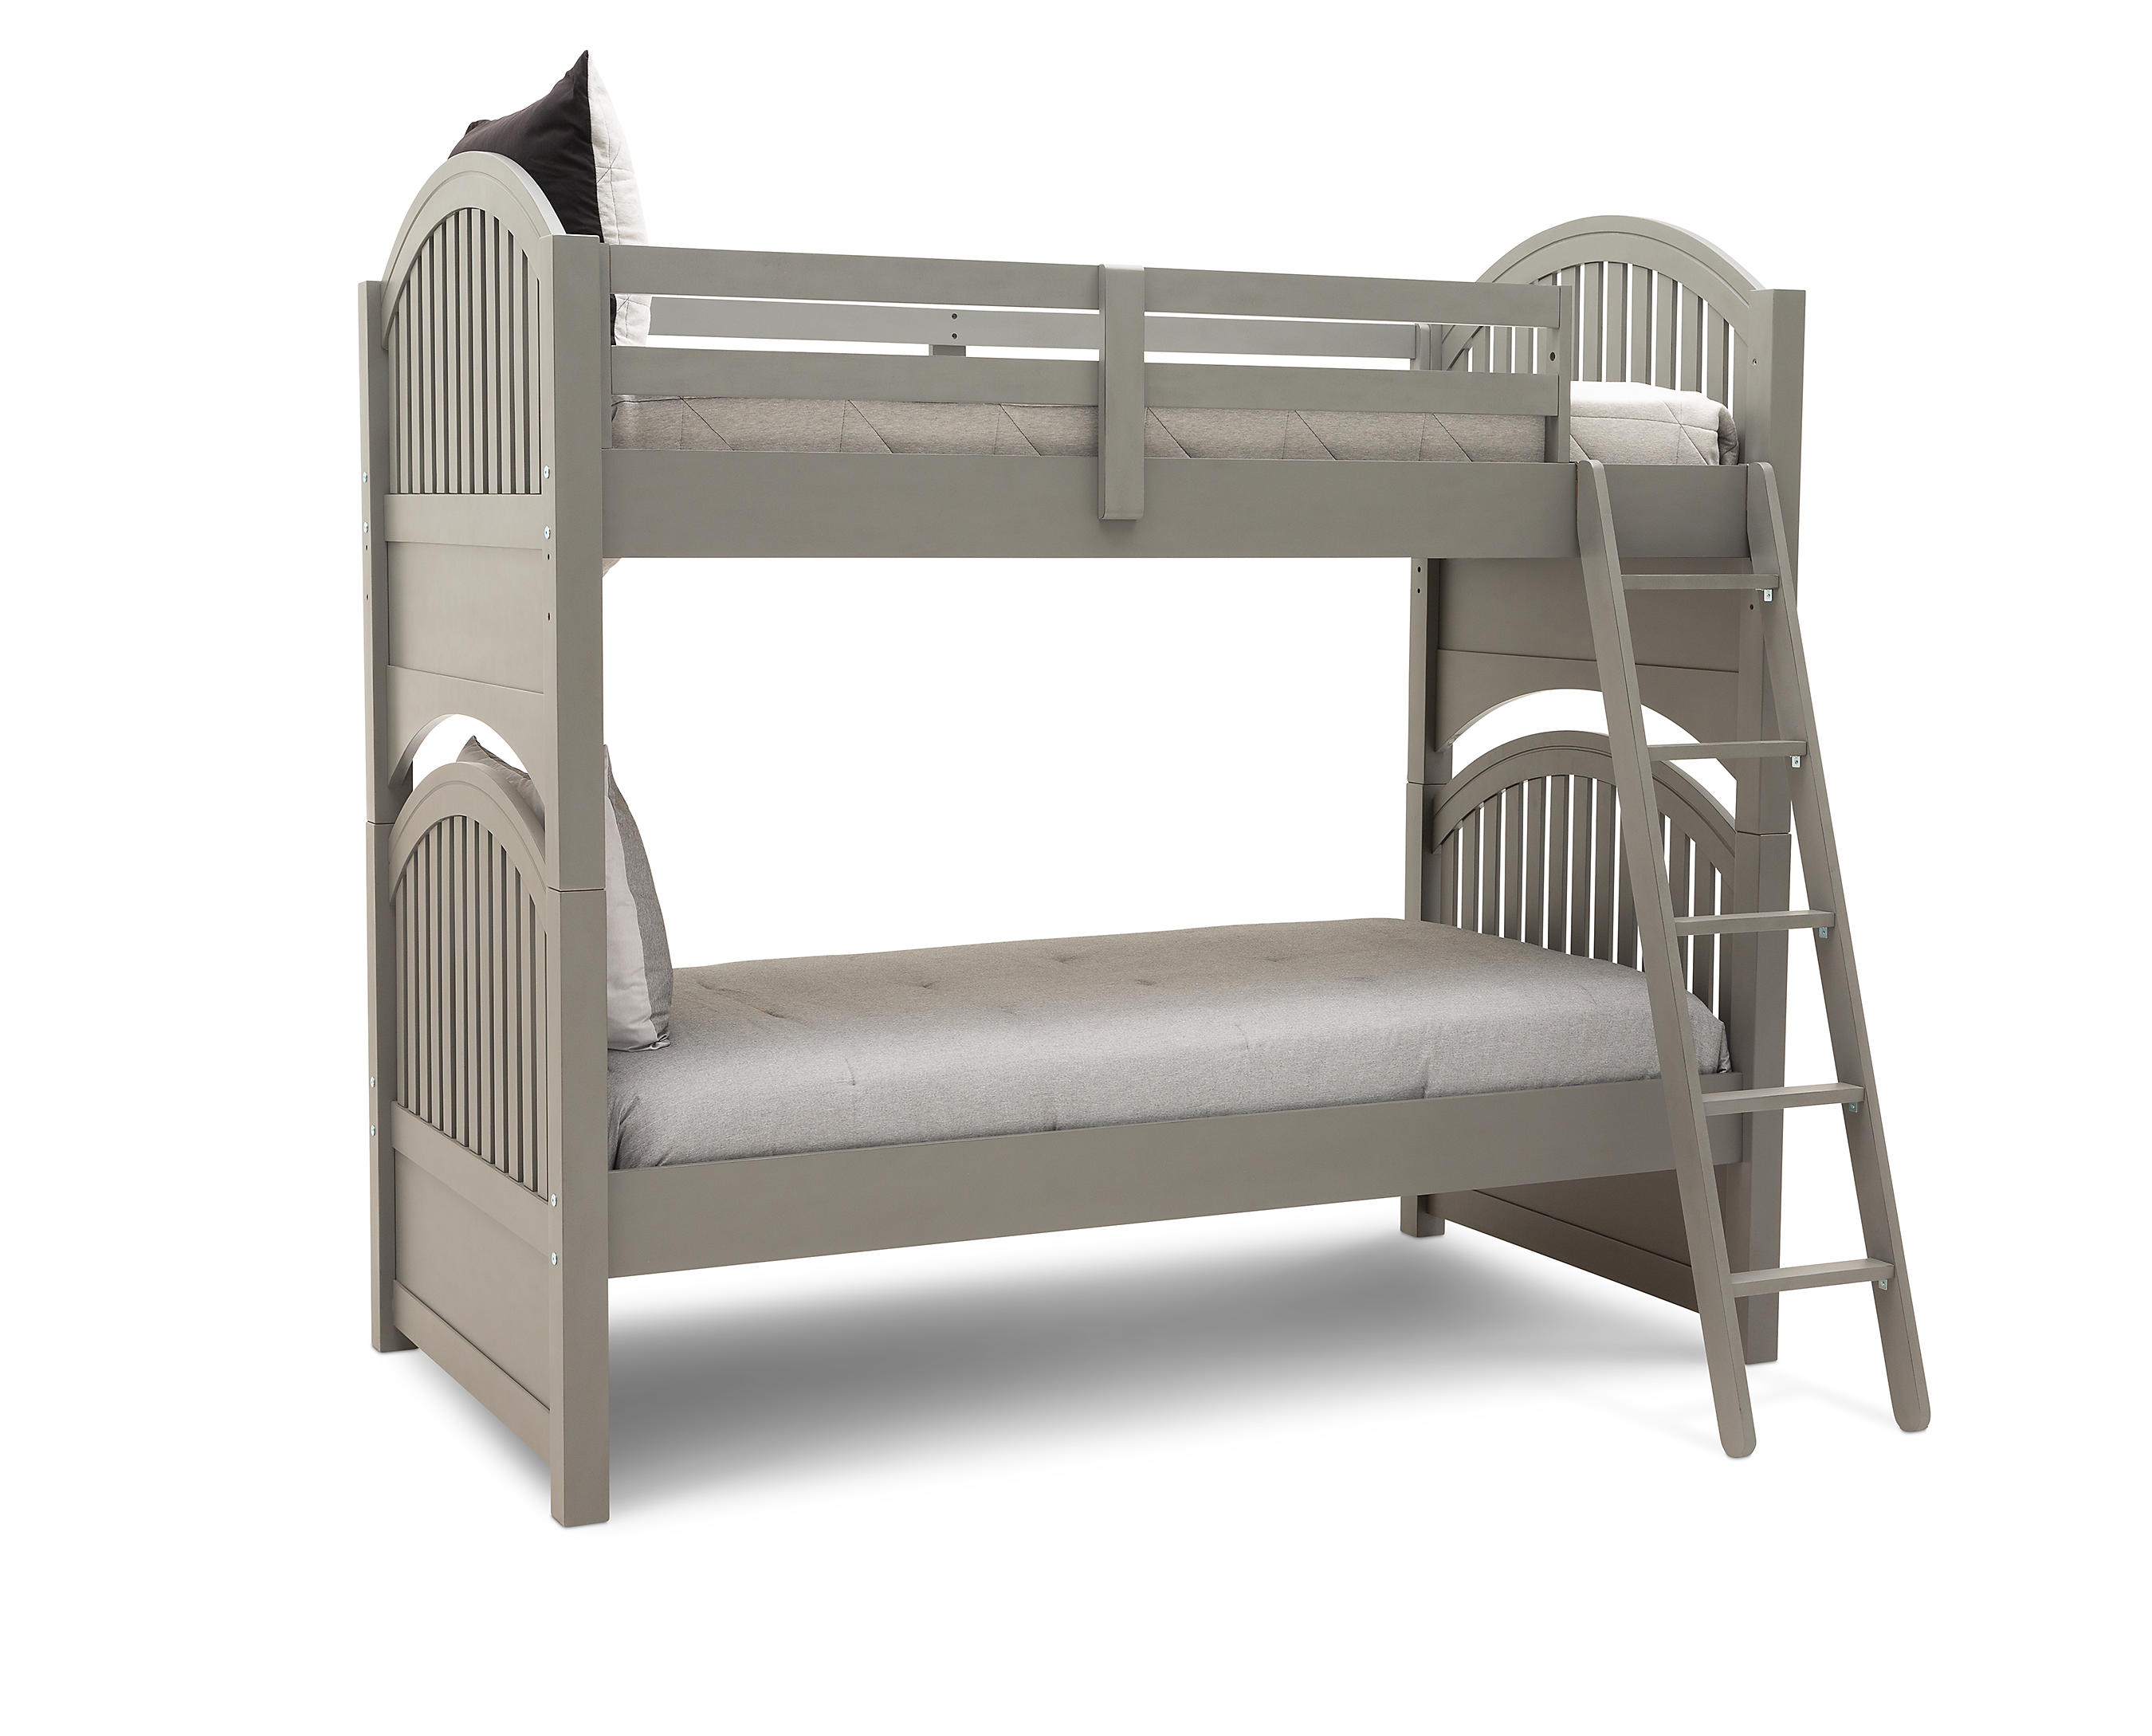 Lake House Bunk Bed Furniture Row, Levin Furniture Bunk Beds